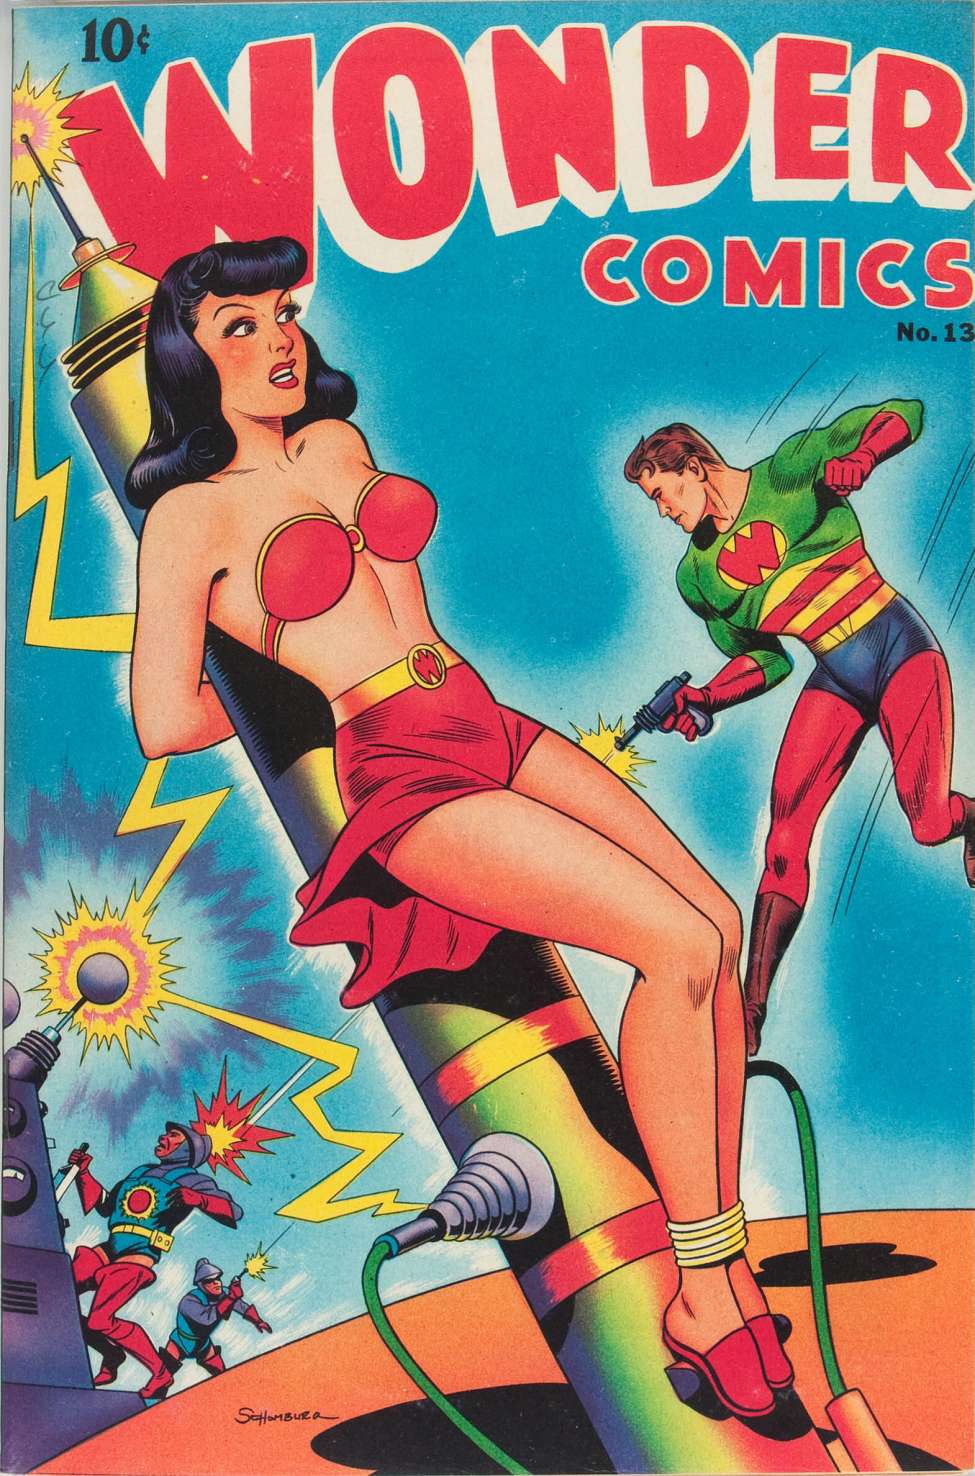 Book Cover For Wonder Comics 13